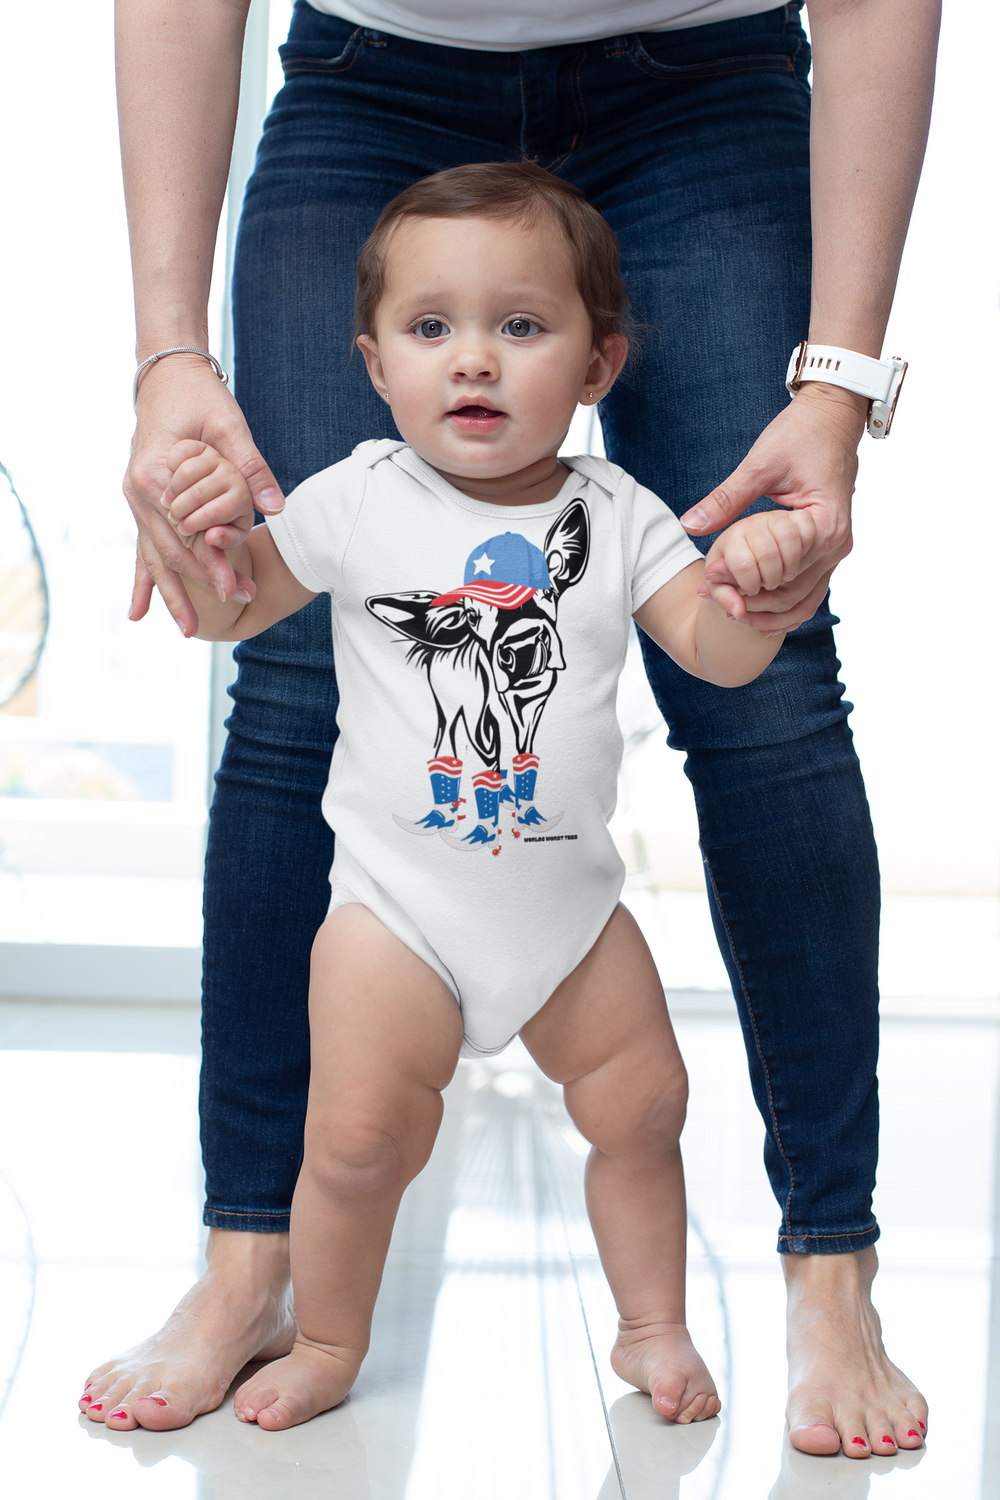 A baby wearing a white onesie featuring a cow design, with a person's hands supporting the baby. This infant fine jersey bodysuit is 100% cotton, with ribbed knitting for durability and plastic snaps for easy changes. From Worlds Worst Tees.